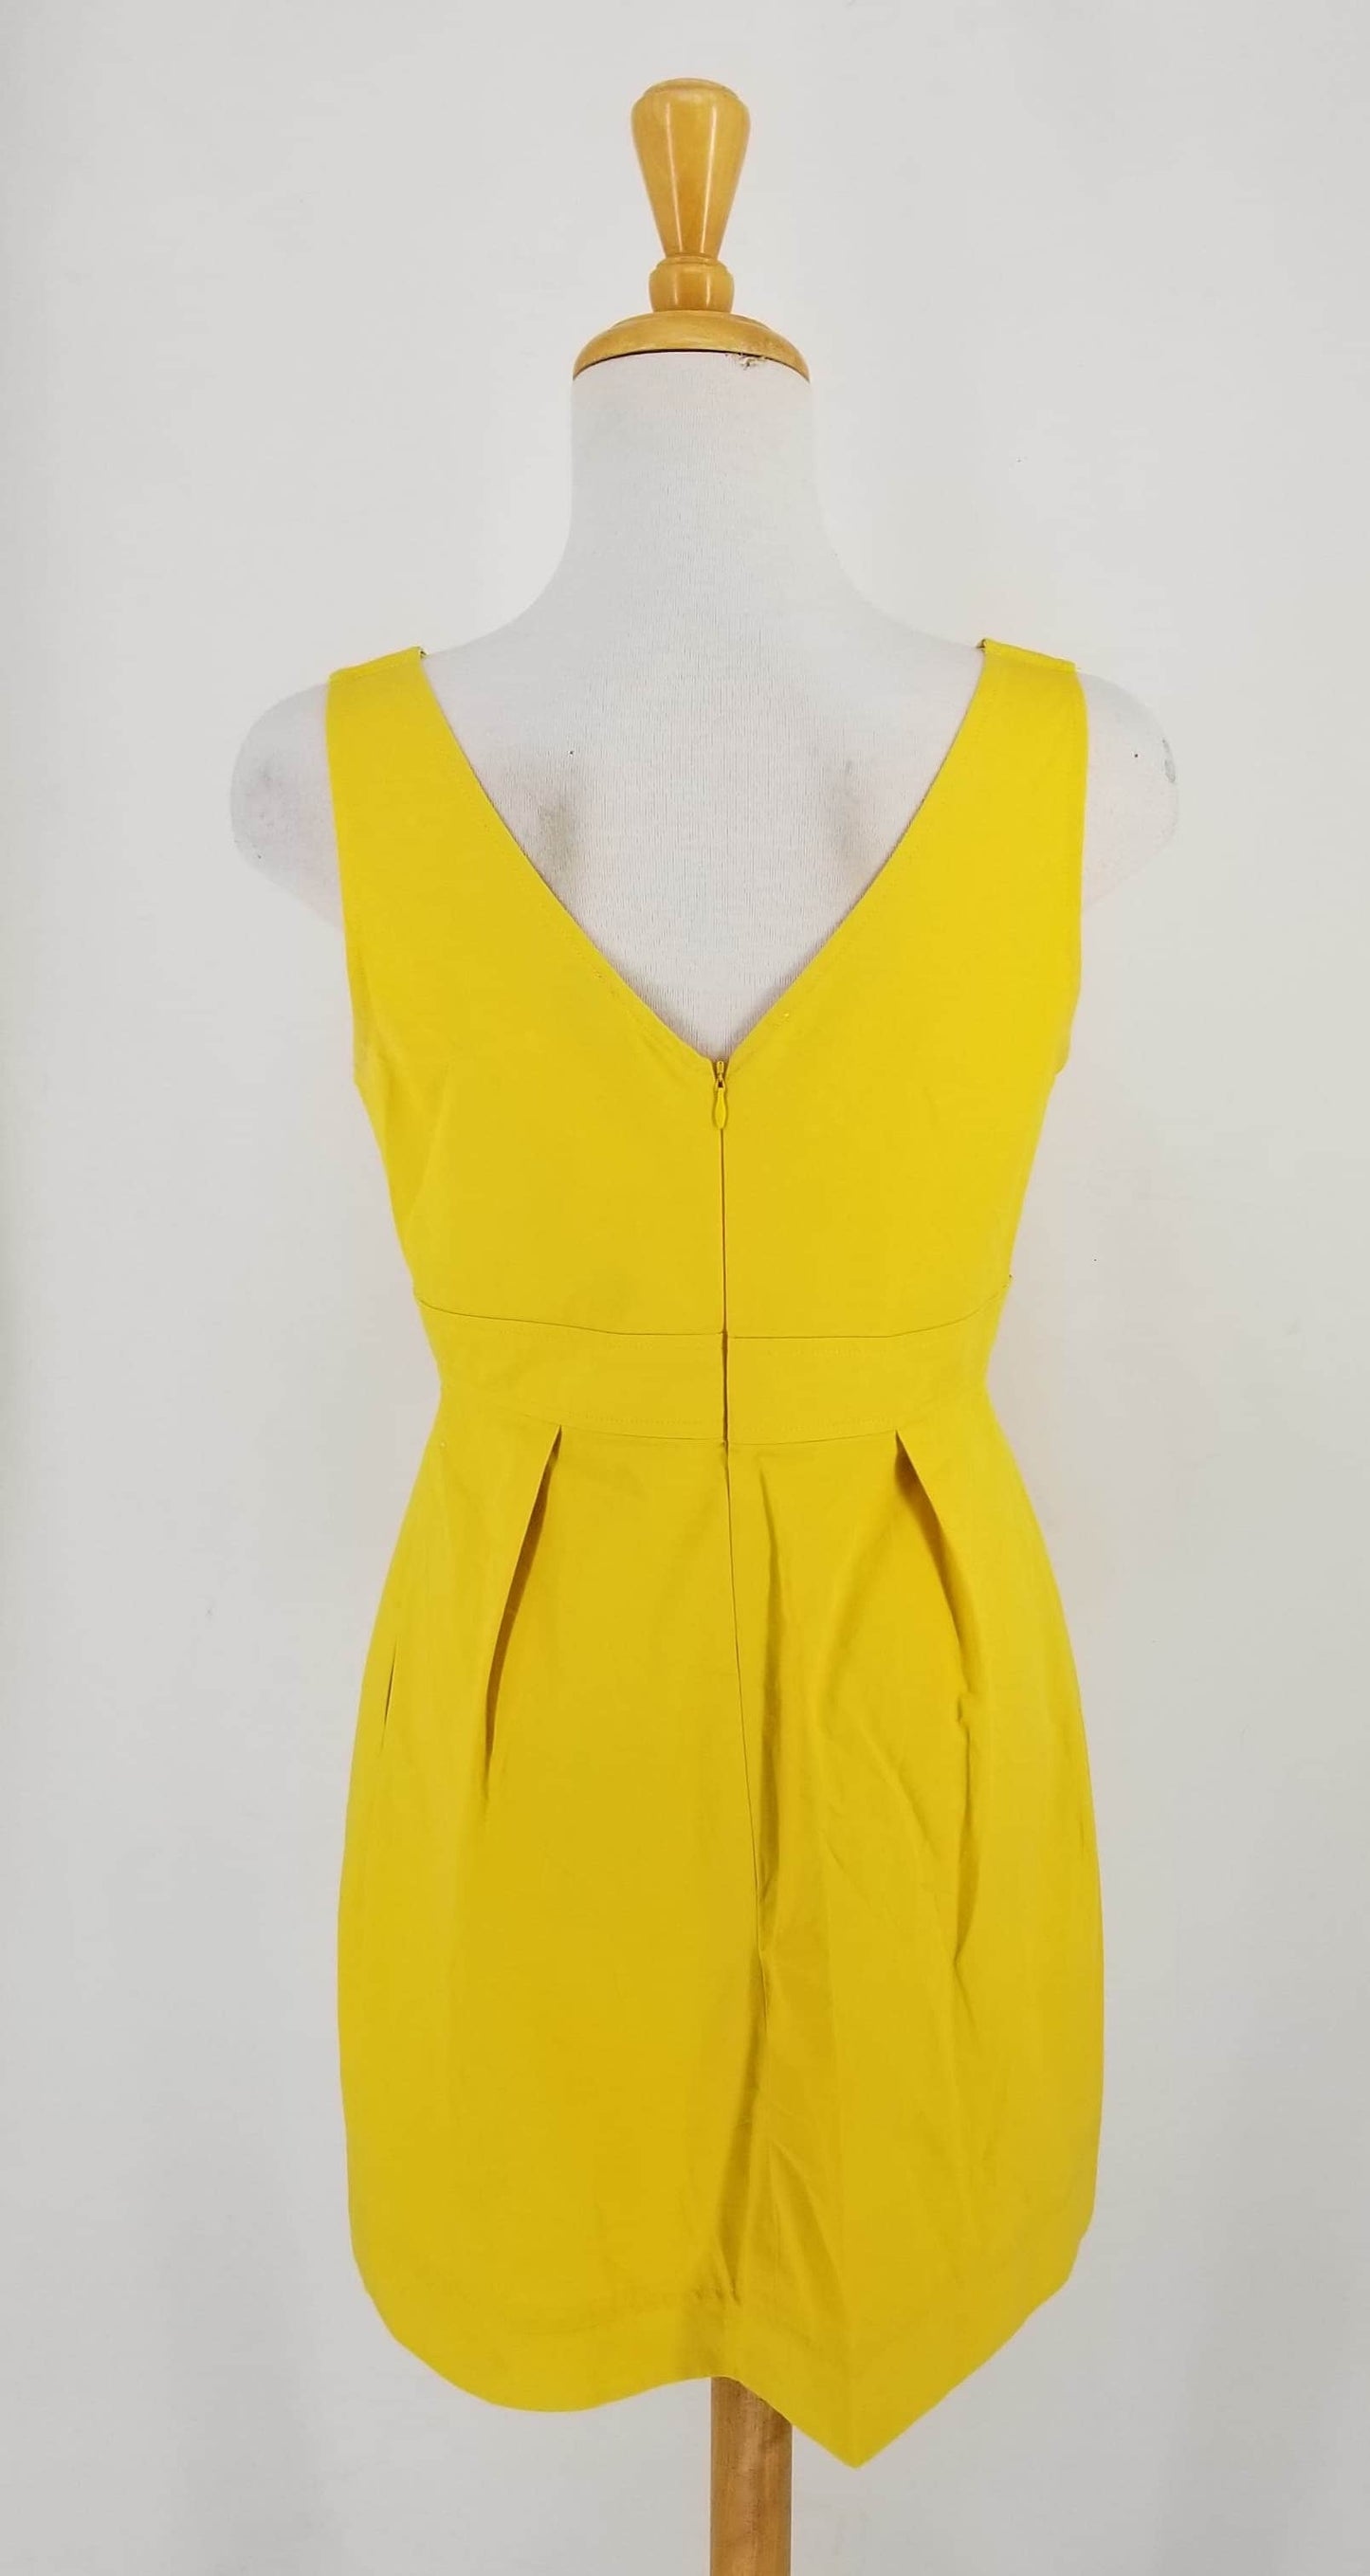 Authentic D & G Yellow Vintage Inspired Dress Sz 44